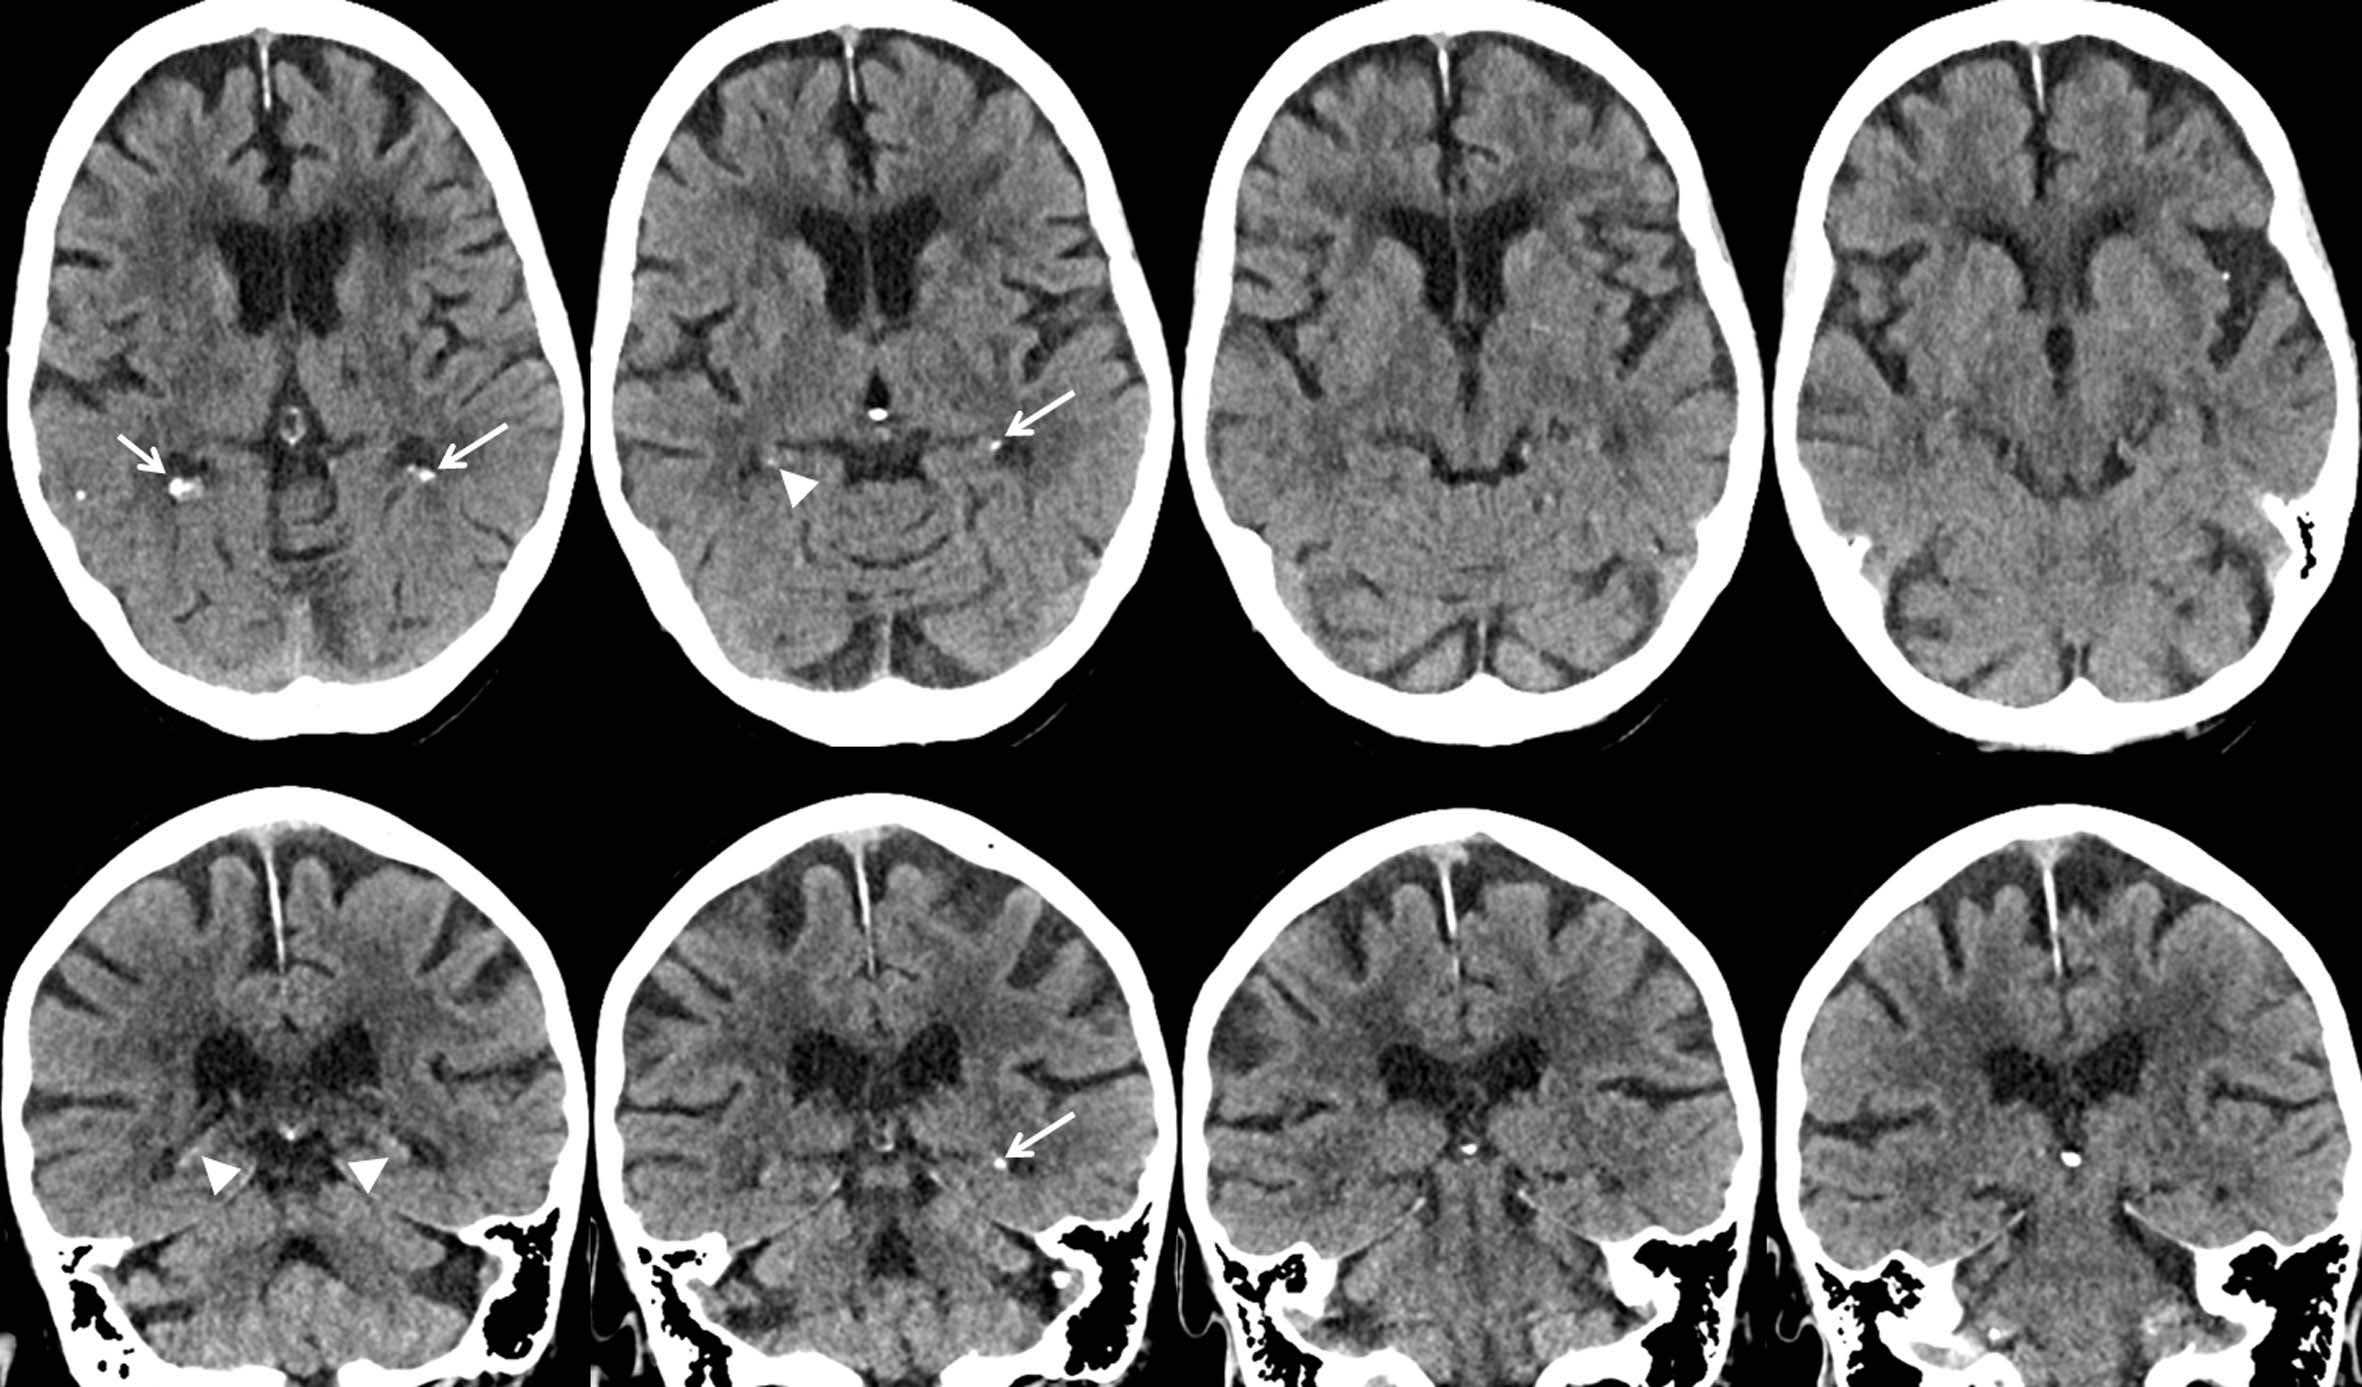 Axial and coronal CT images in 88-year-old woman show mild hippocampal calcification (arrowheads). Image credits: Radiological Society of North America.